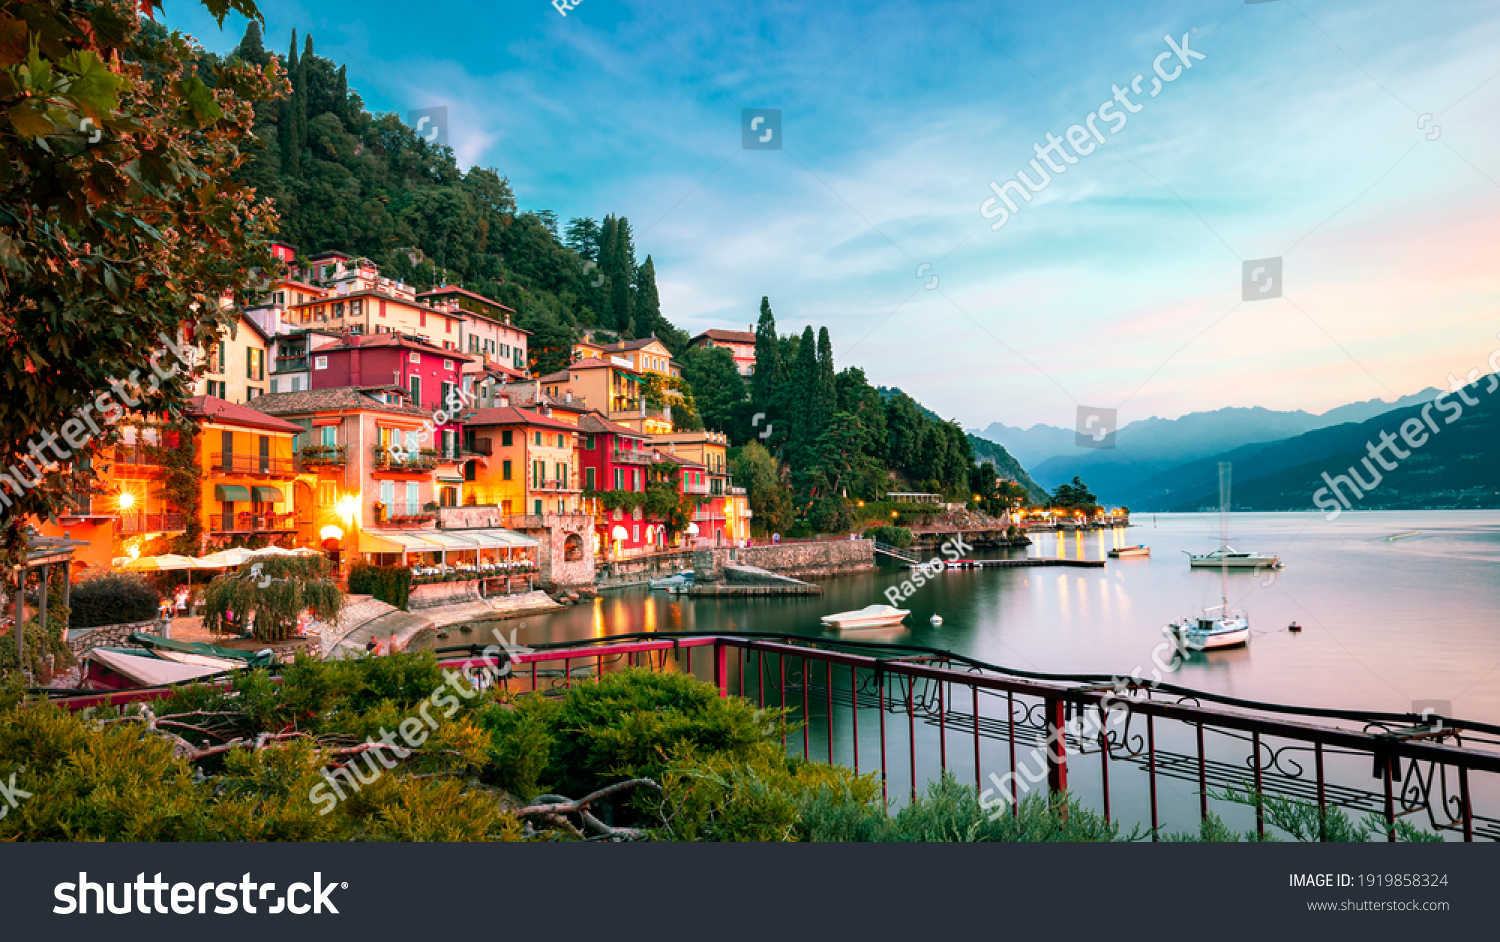 Varenna old town - scenic sunset view in Como lake, Italy. #1919858324